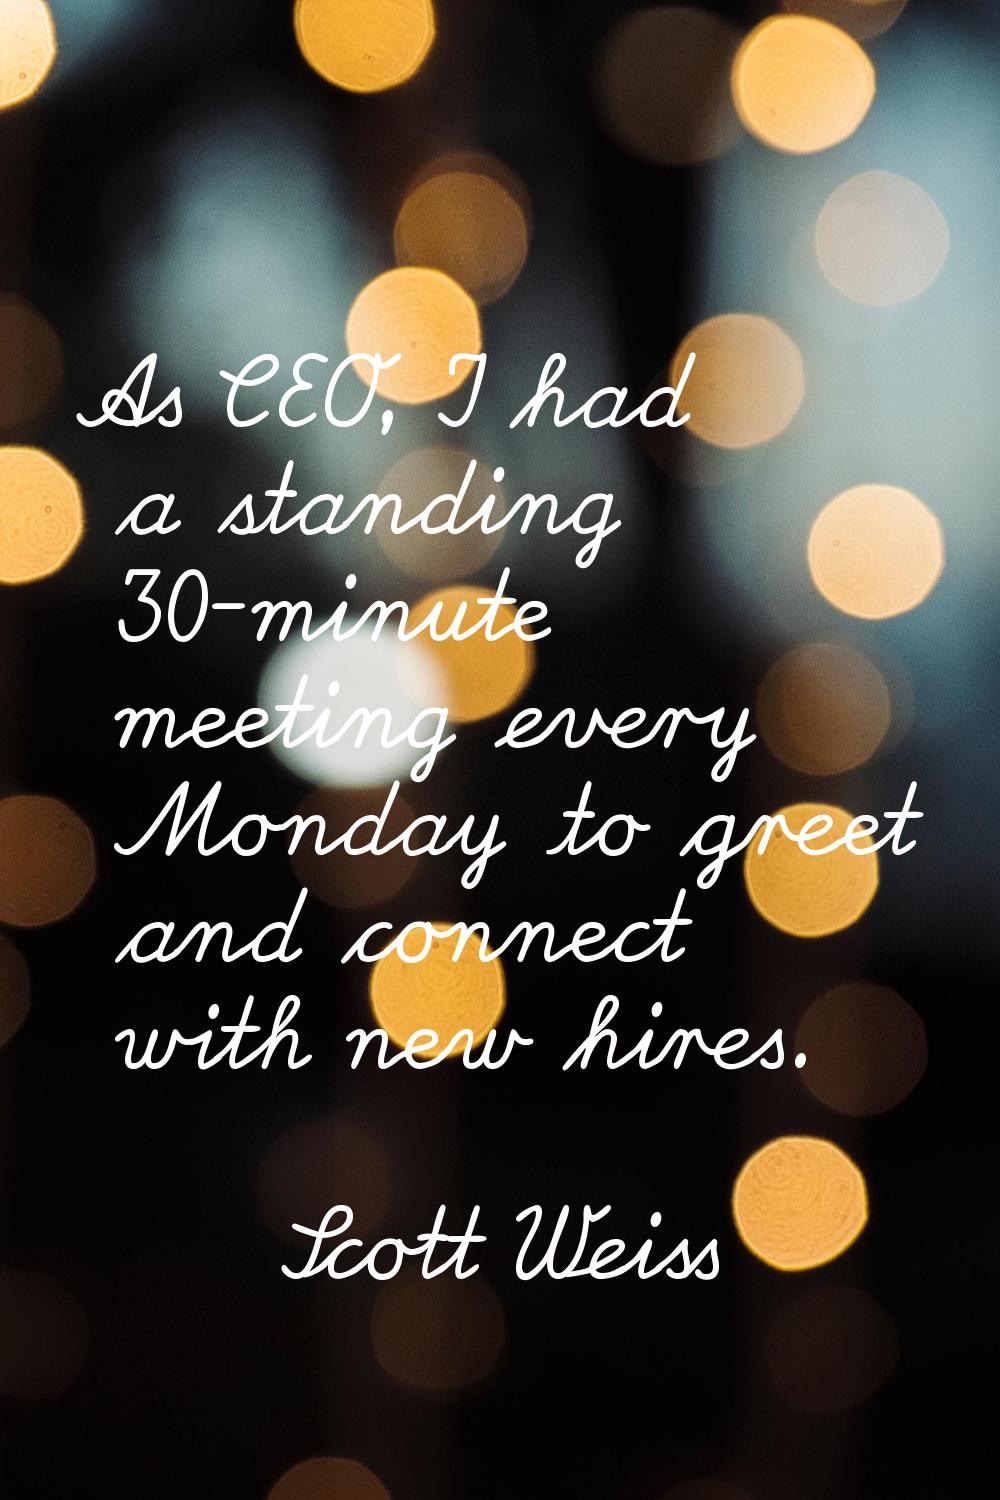 As CEO, I had a standing 30-minute meeting every Monday to greet and connect with new hires.